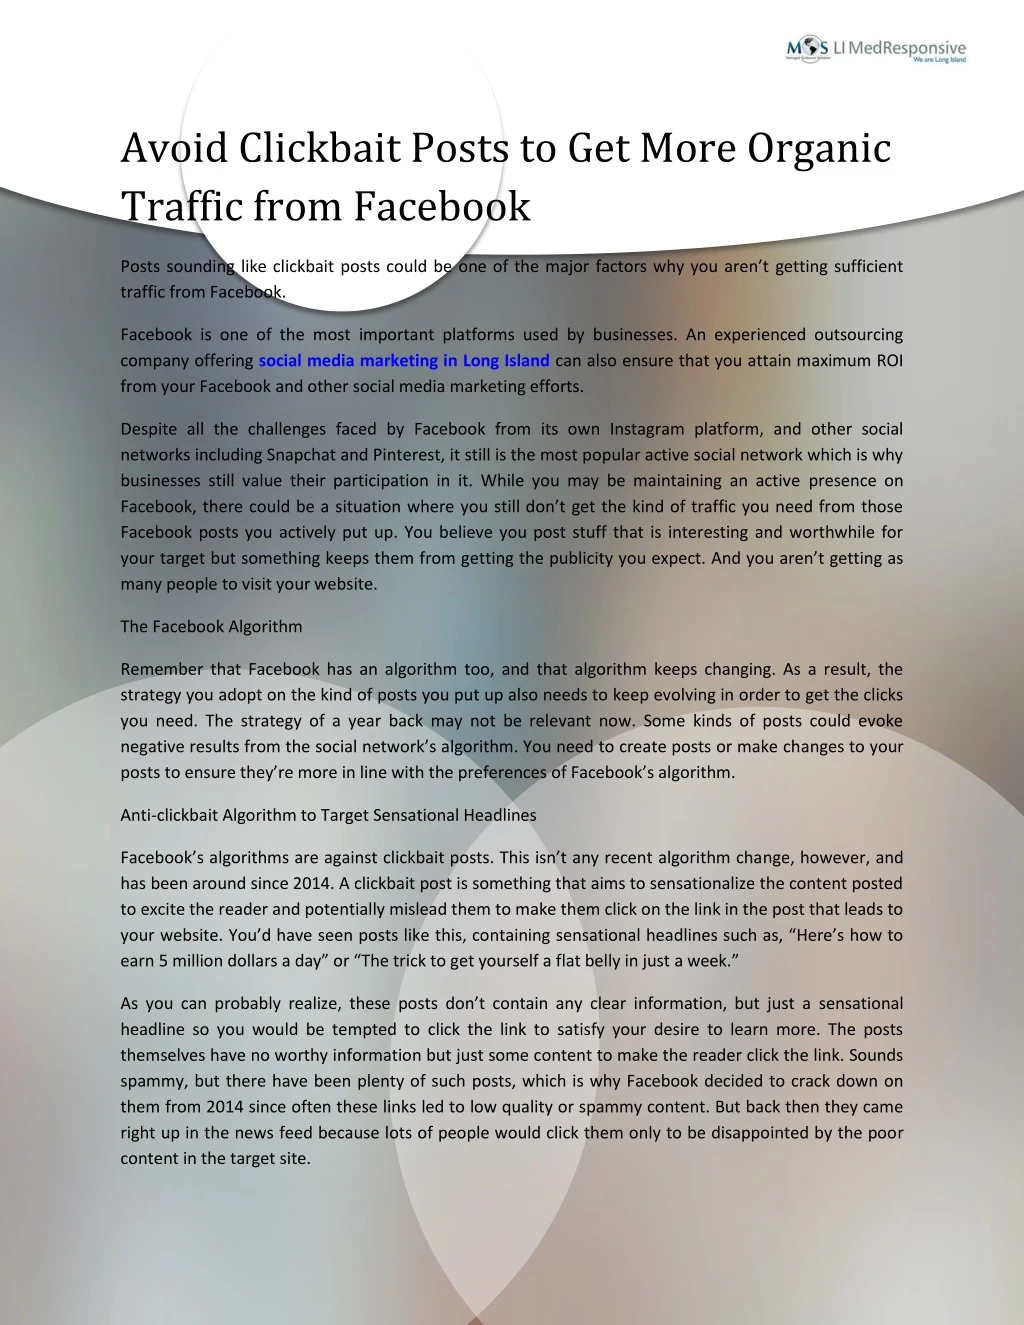 avoid clickbait posts to get more organic traffic